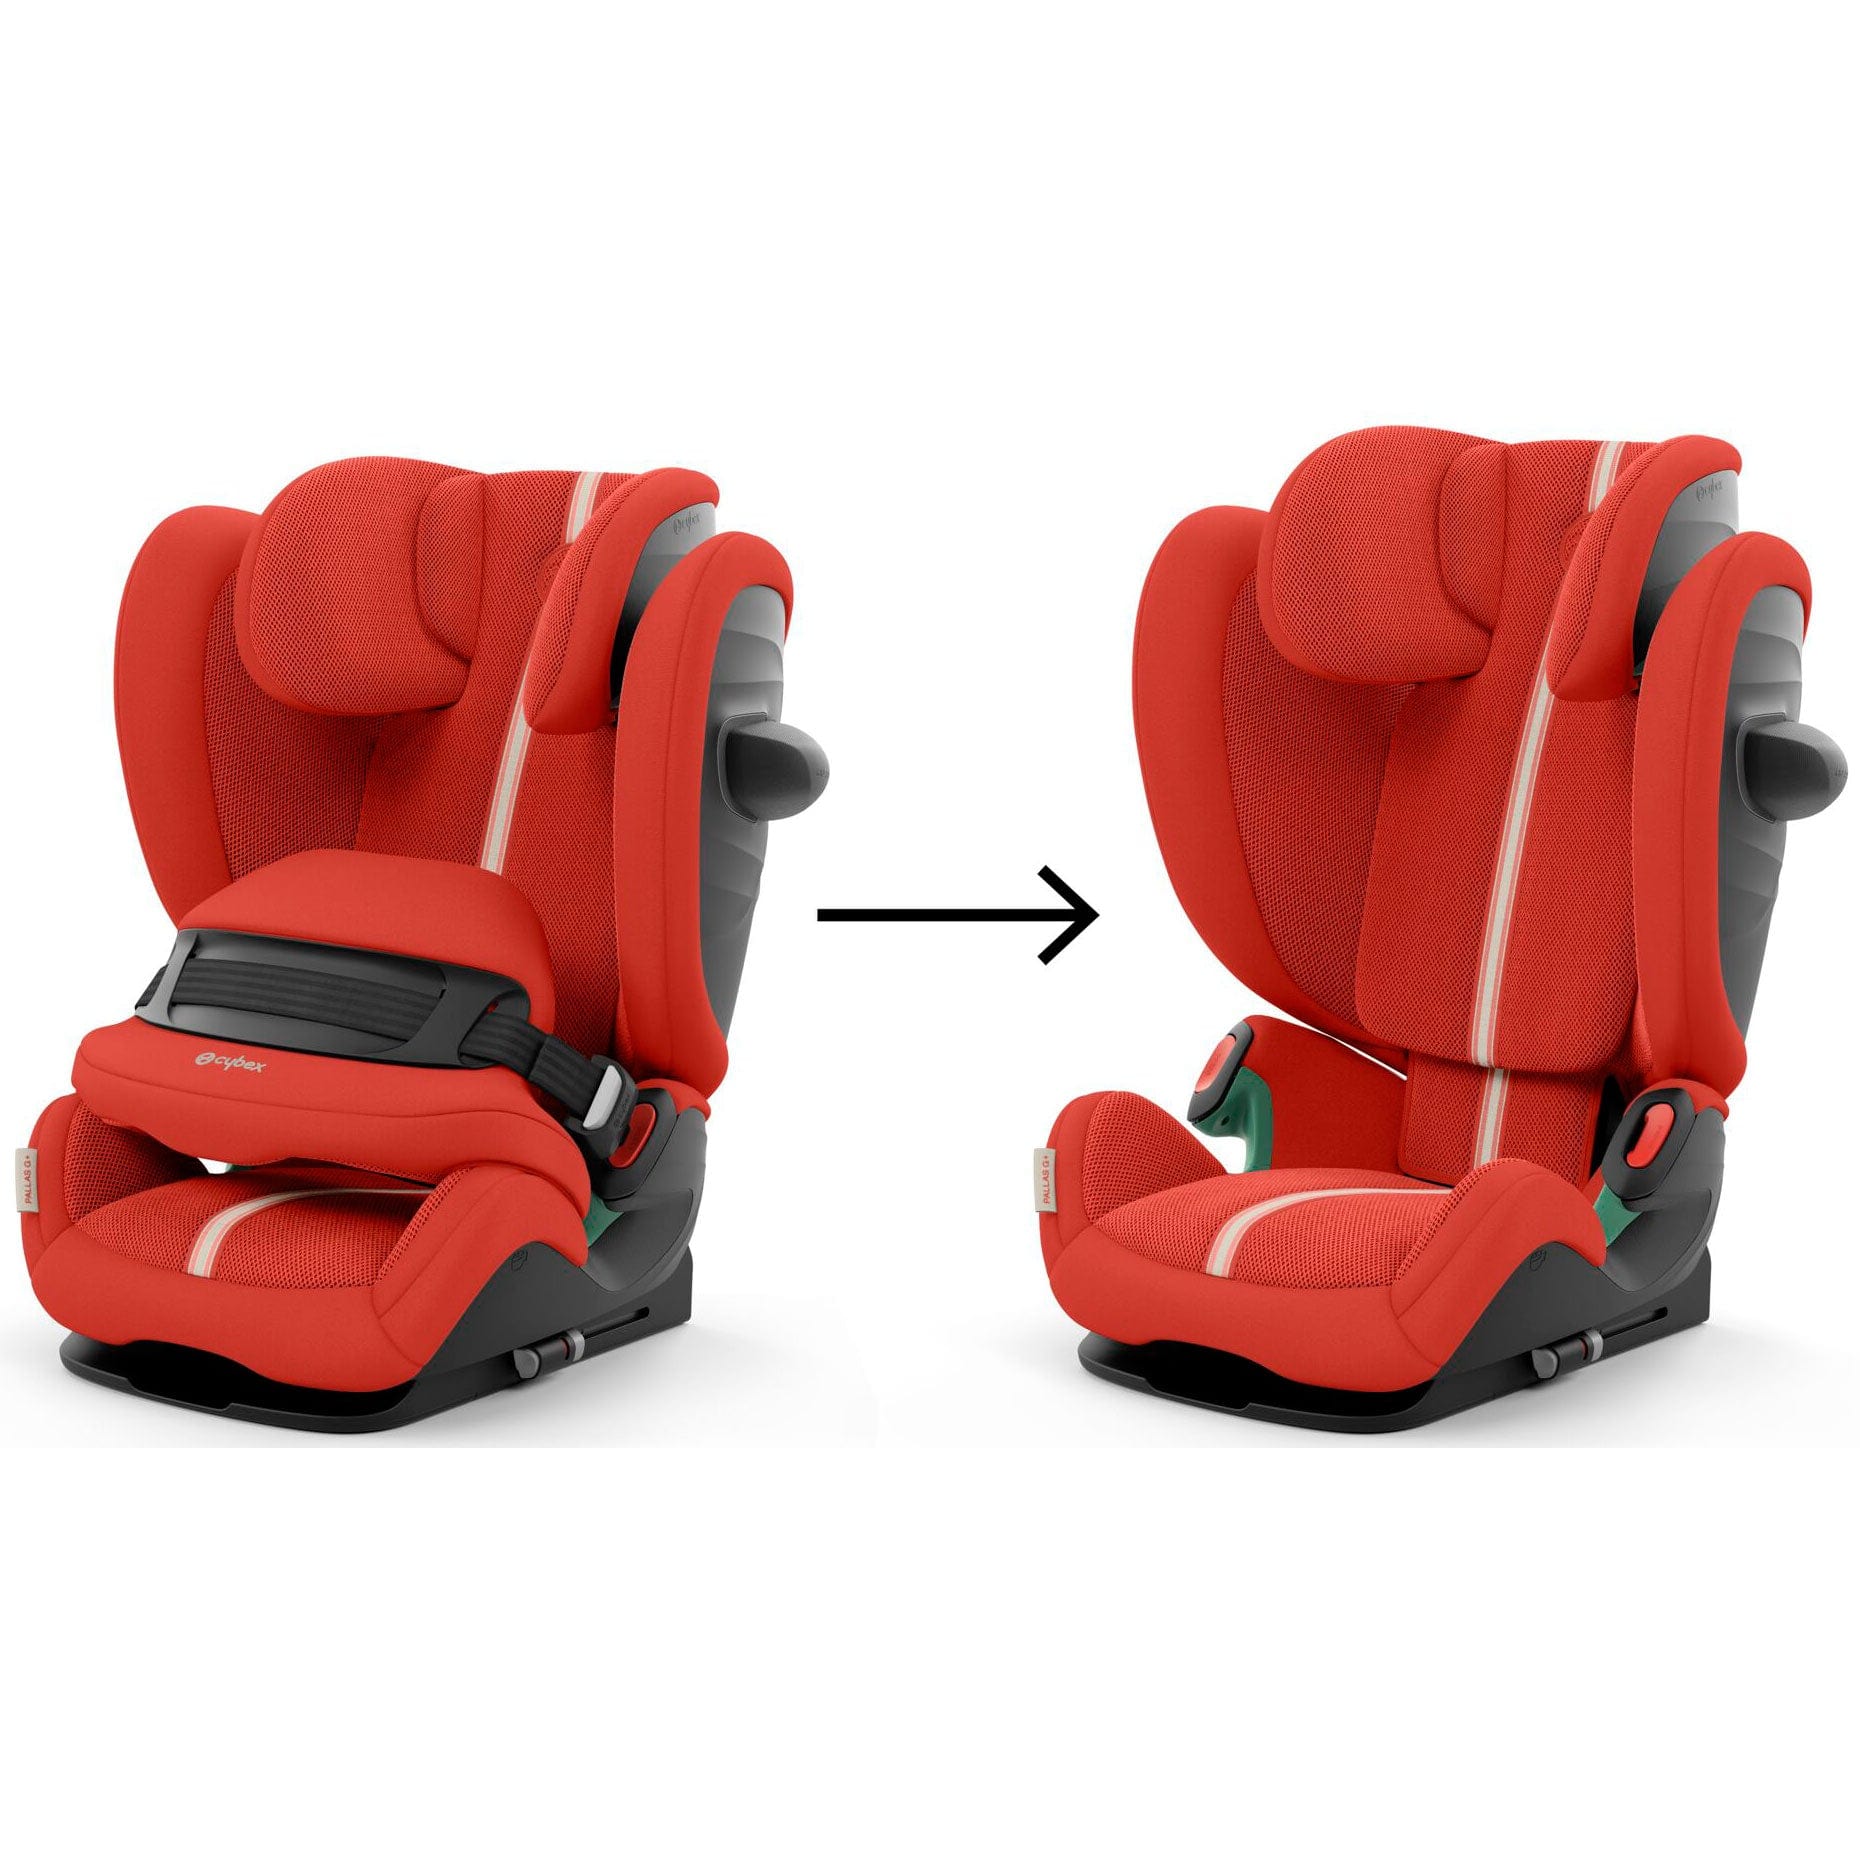 Child Car Seat Solution S2 i-Fix Design Hibiscus Red by Cybex / Kids-Comfort